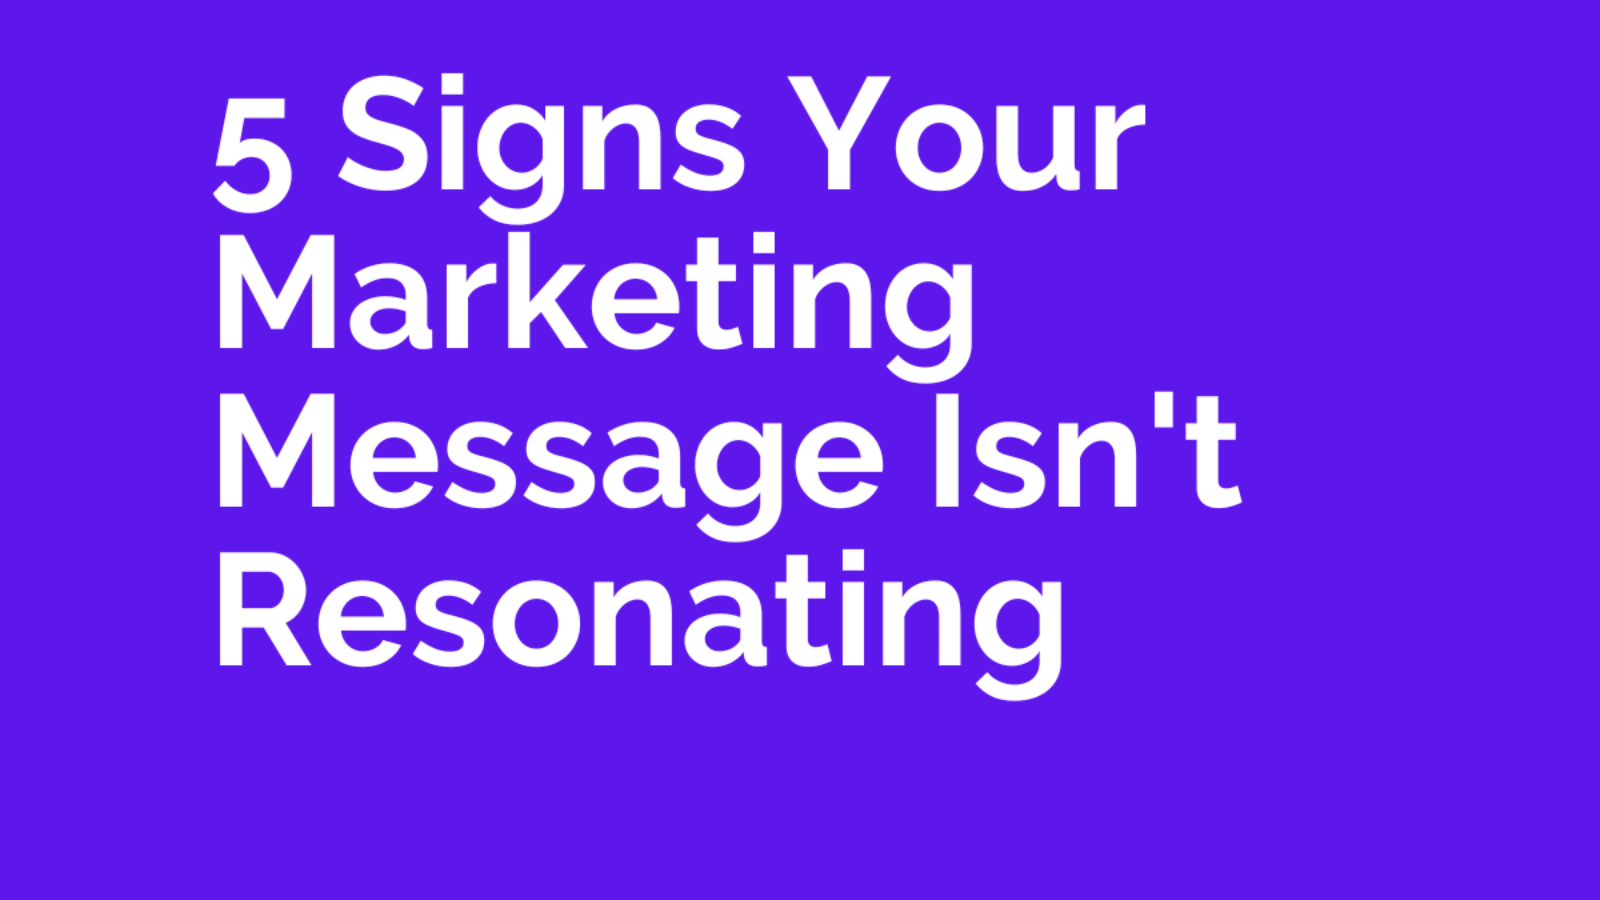 5 Signs Your Marketing Message Isn't Resonating with Your Audience